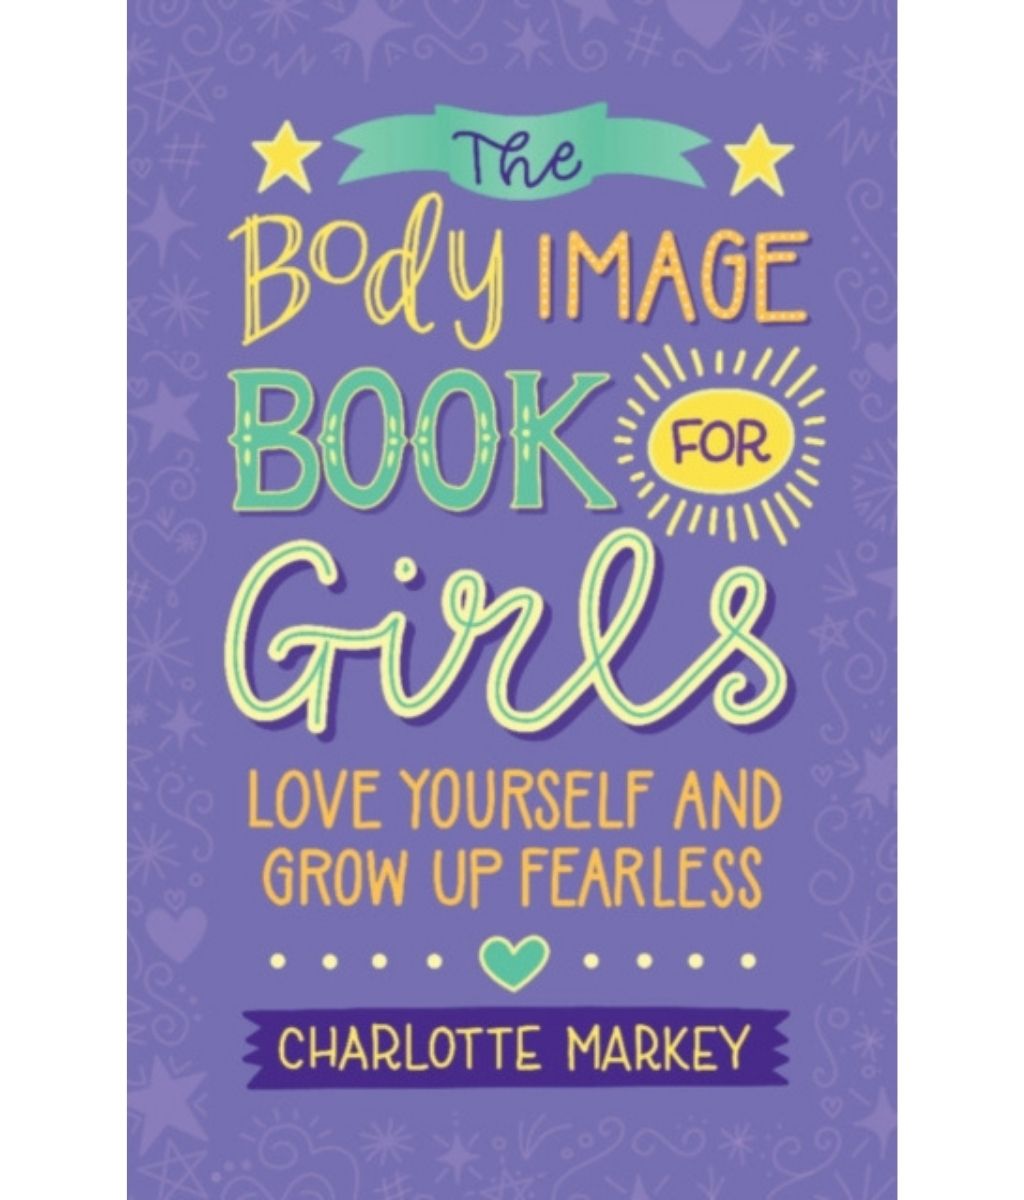 The Body Image Book For Girls: Love Yourself and Grow Up Fearless